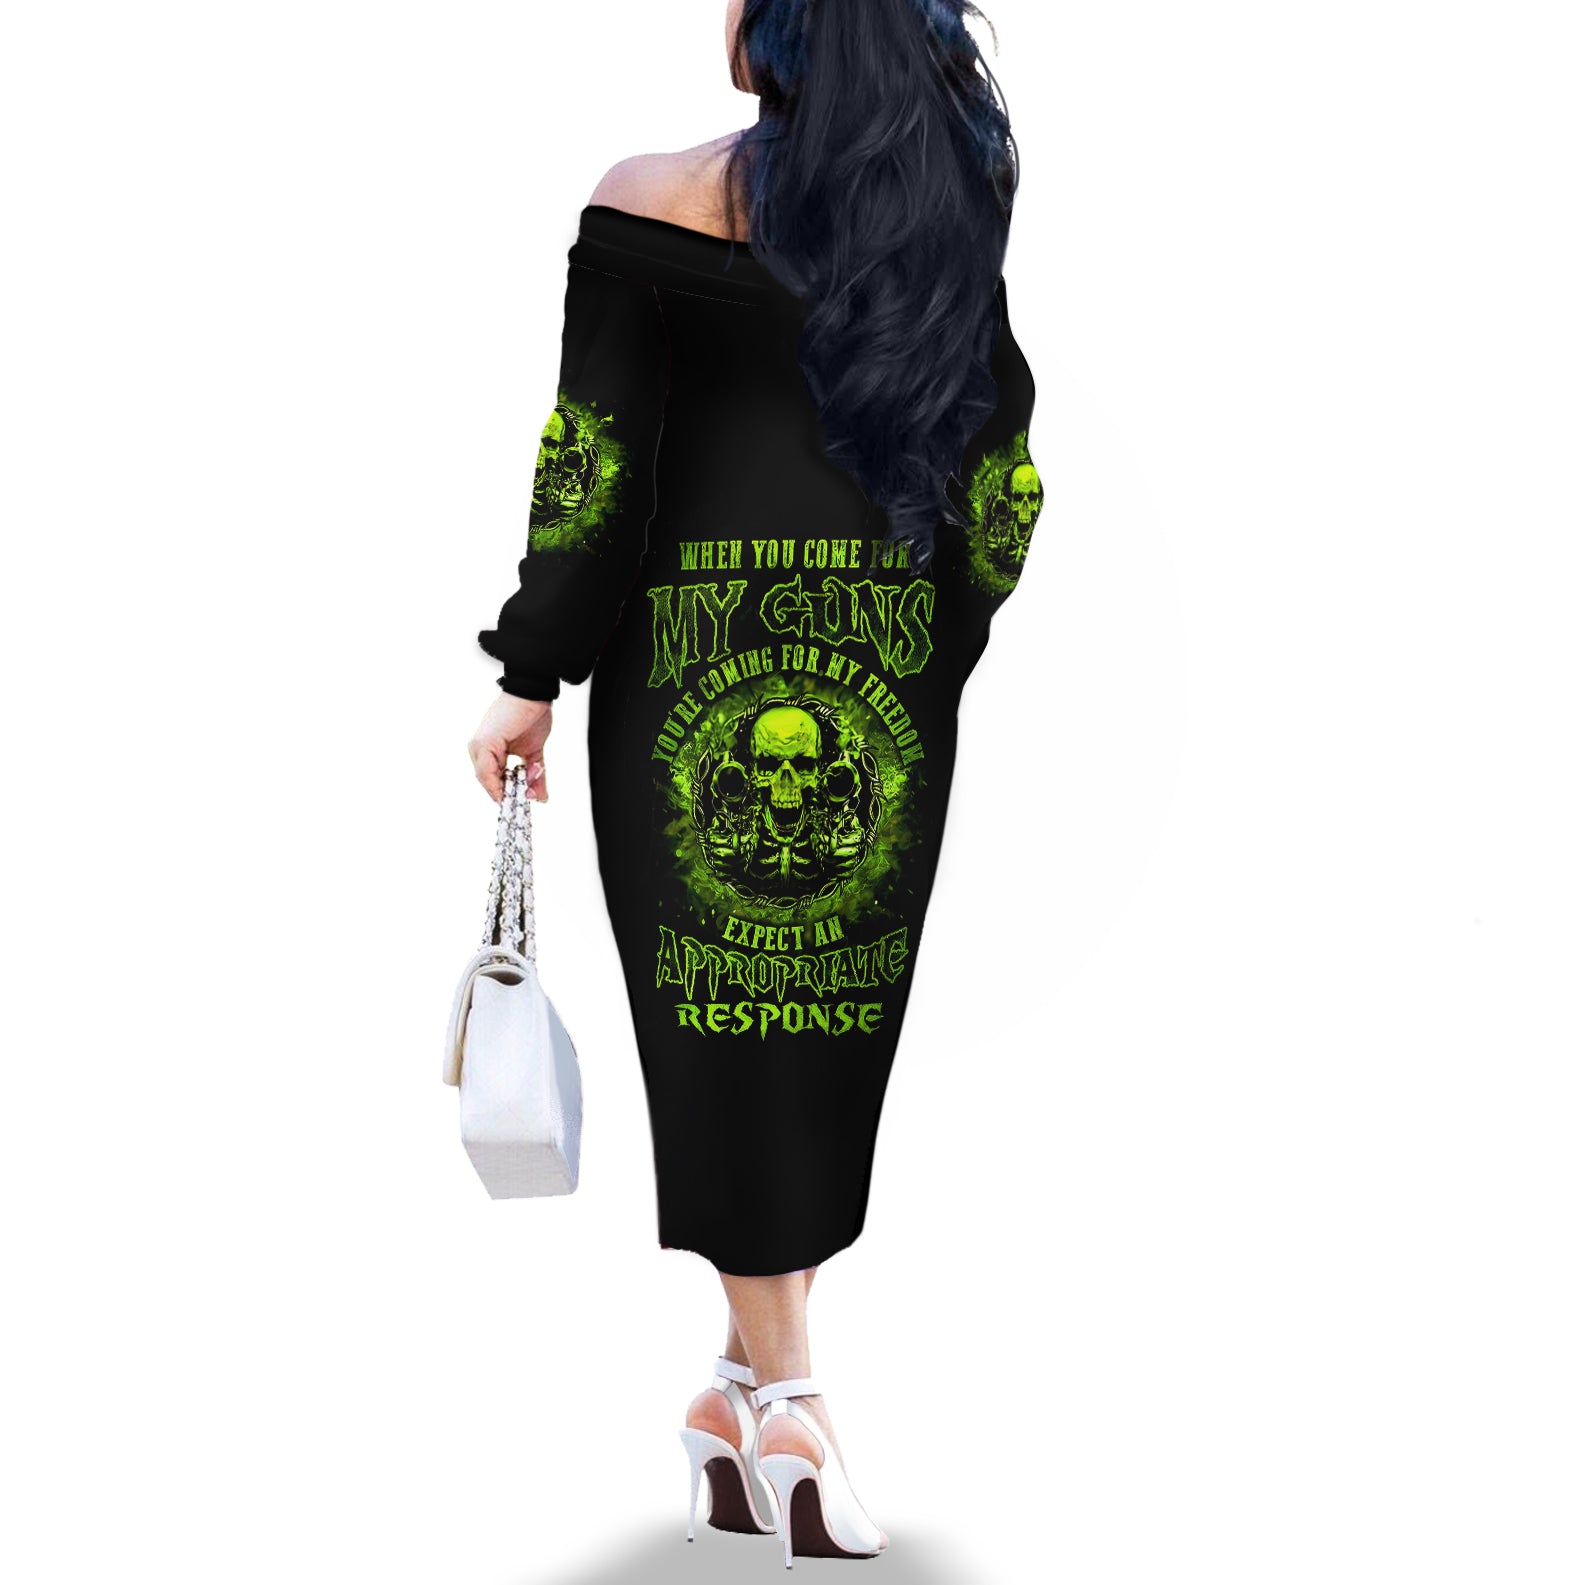 gun-skull-off-the-shoulder-long-sleeve-dress-when-you-come-for-my-gun-expect-an-appropriate-response